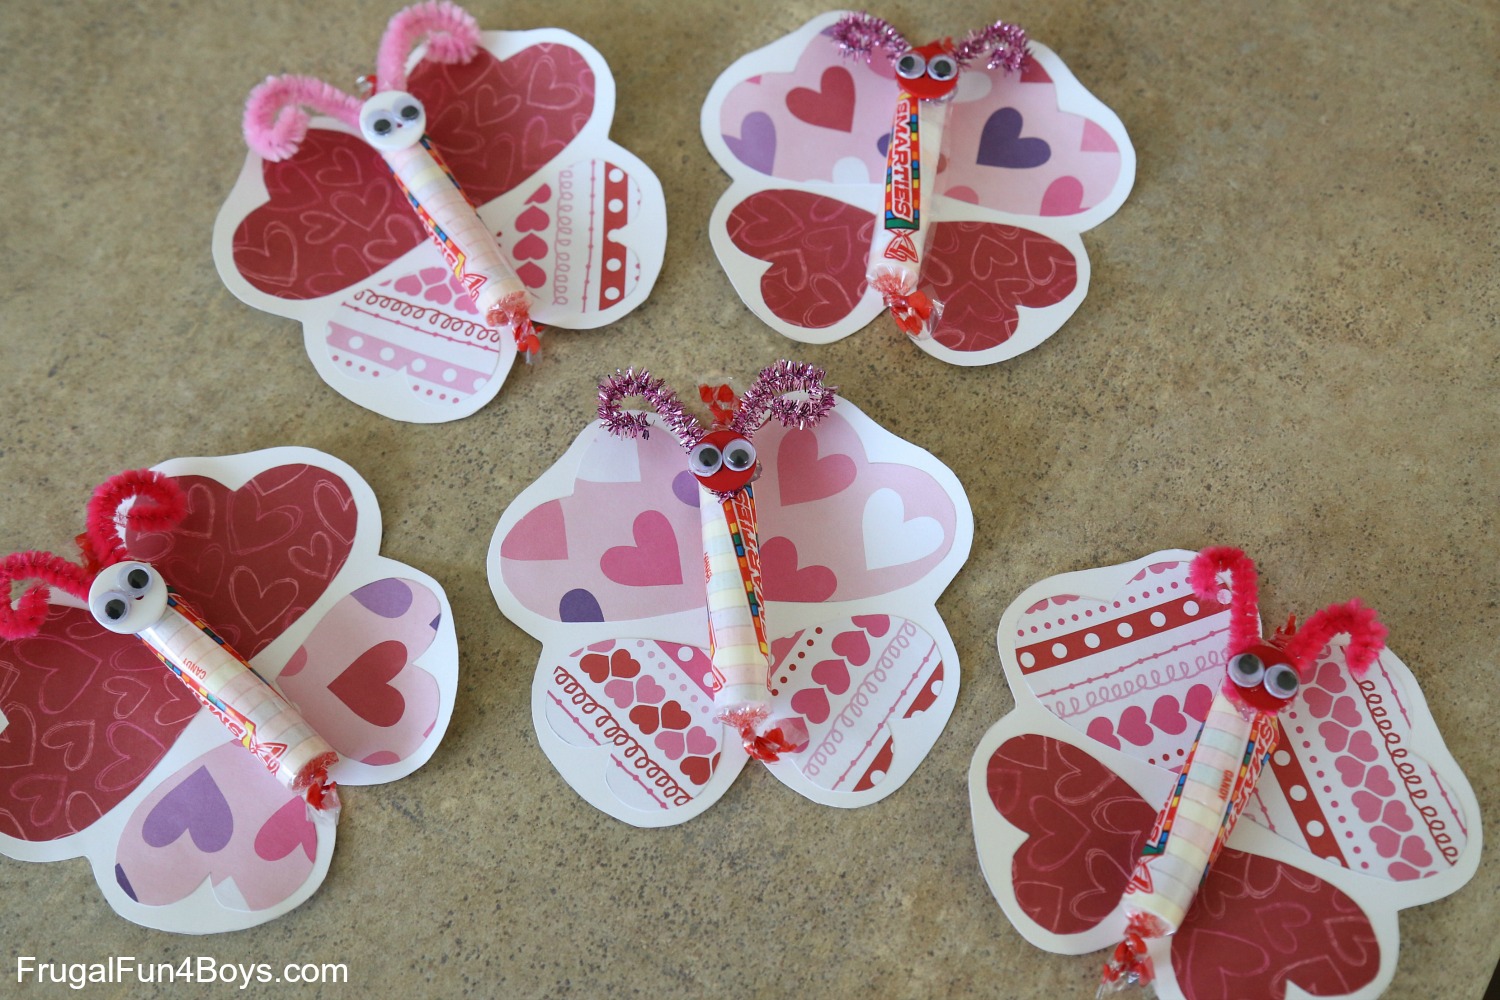 Adorable Butterfly Valentines to Make